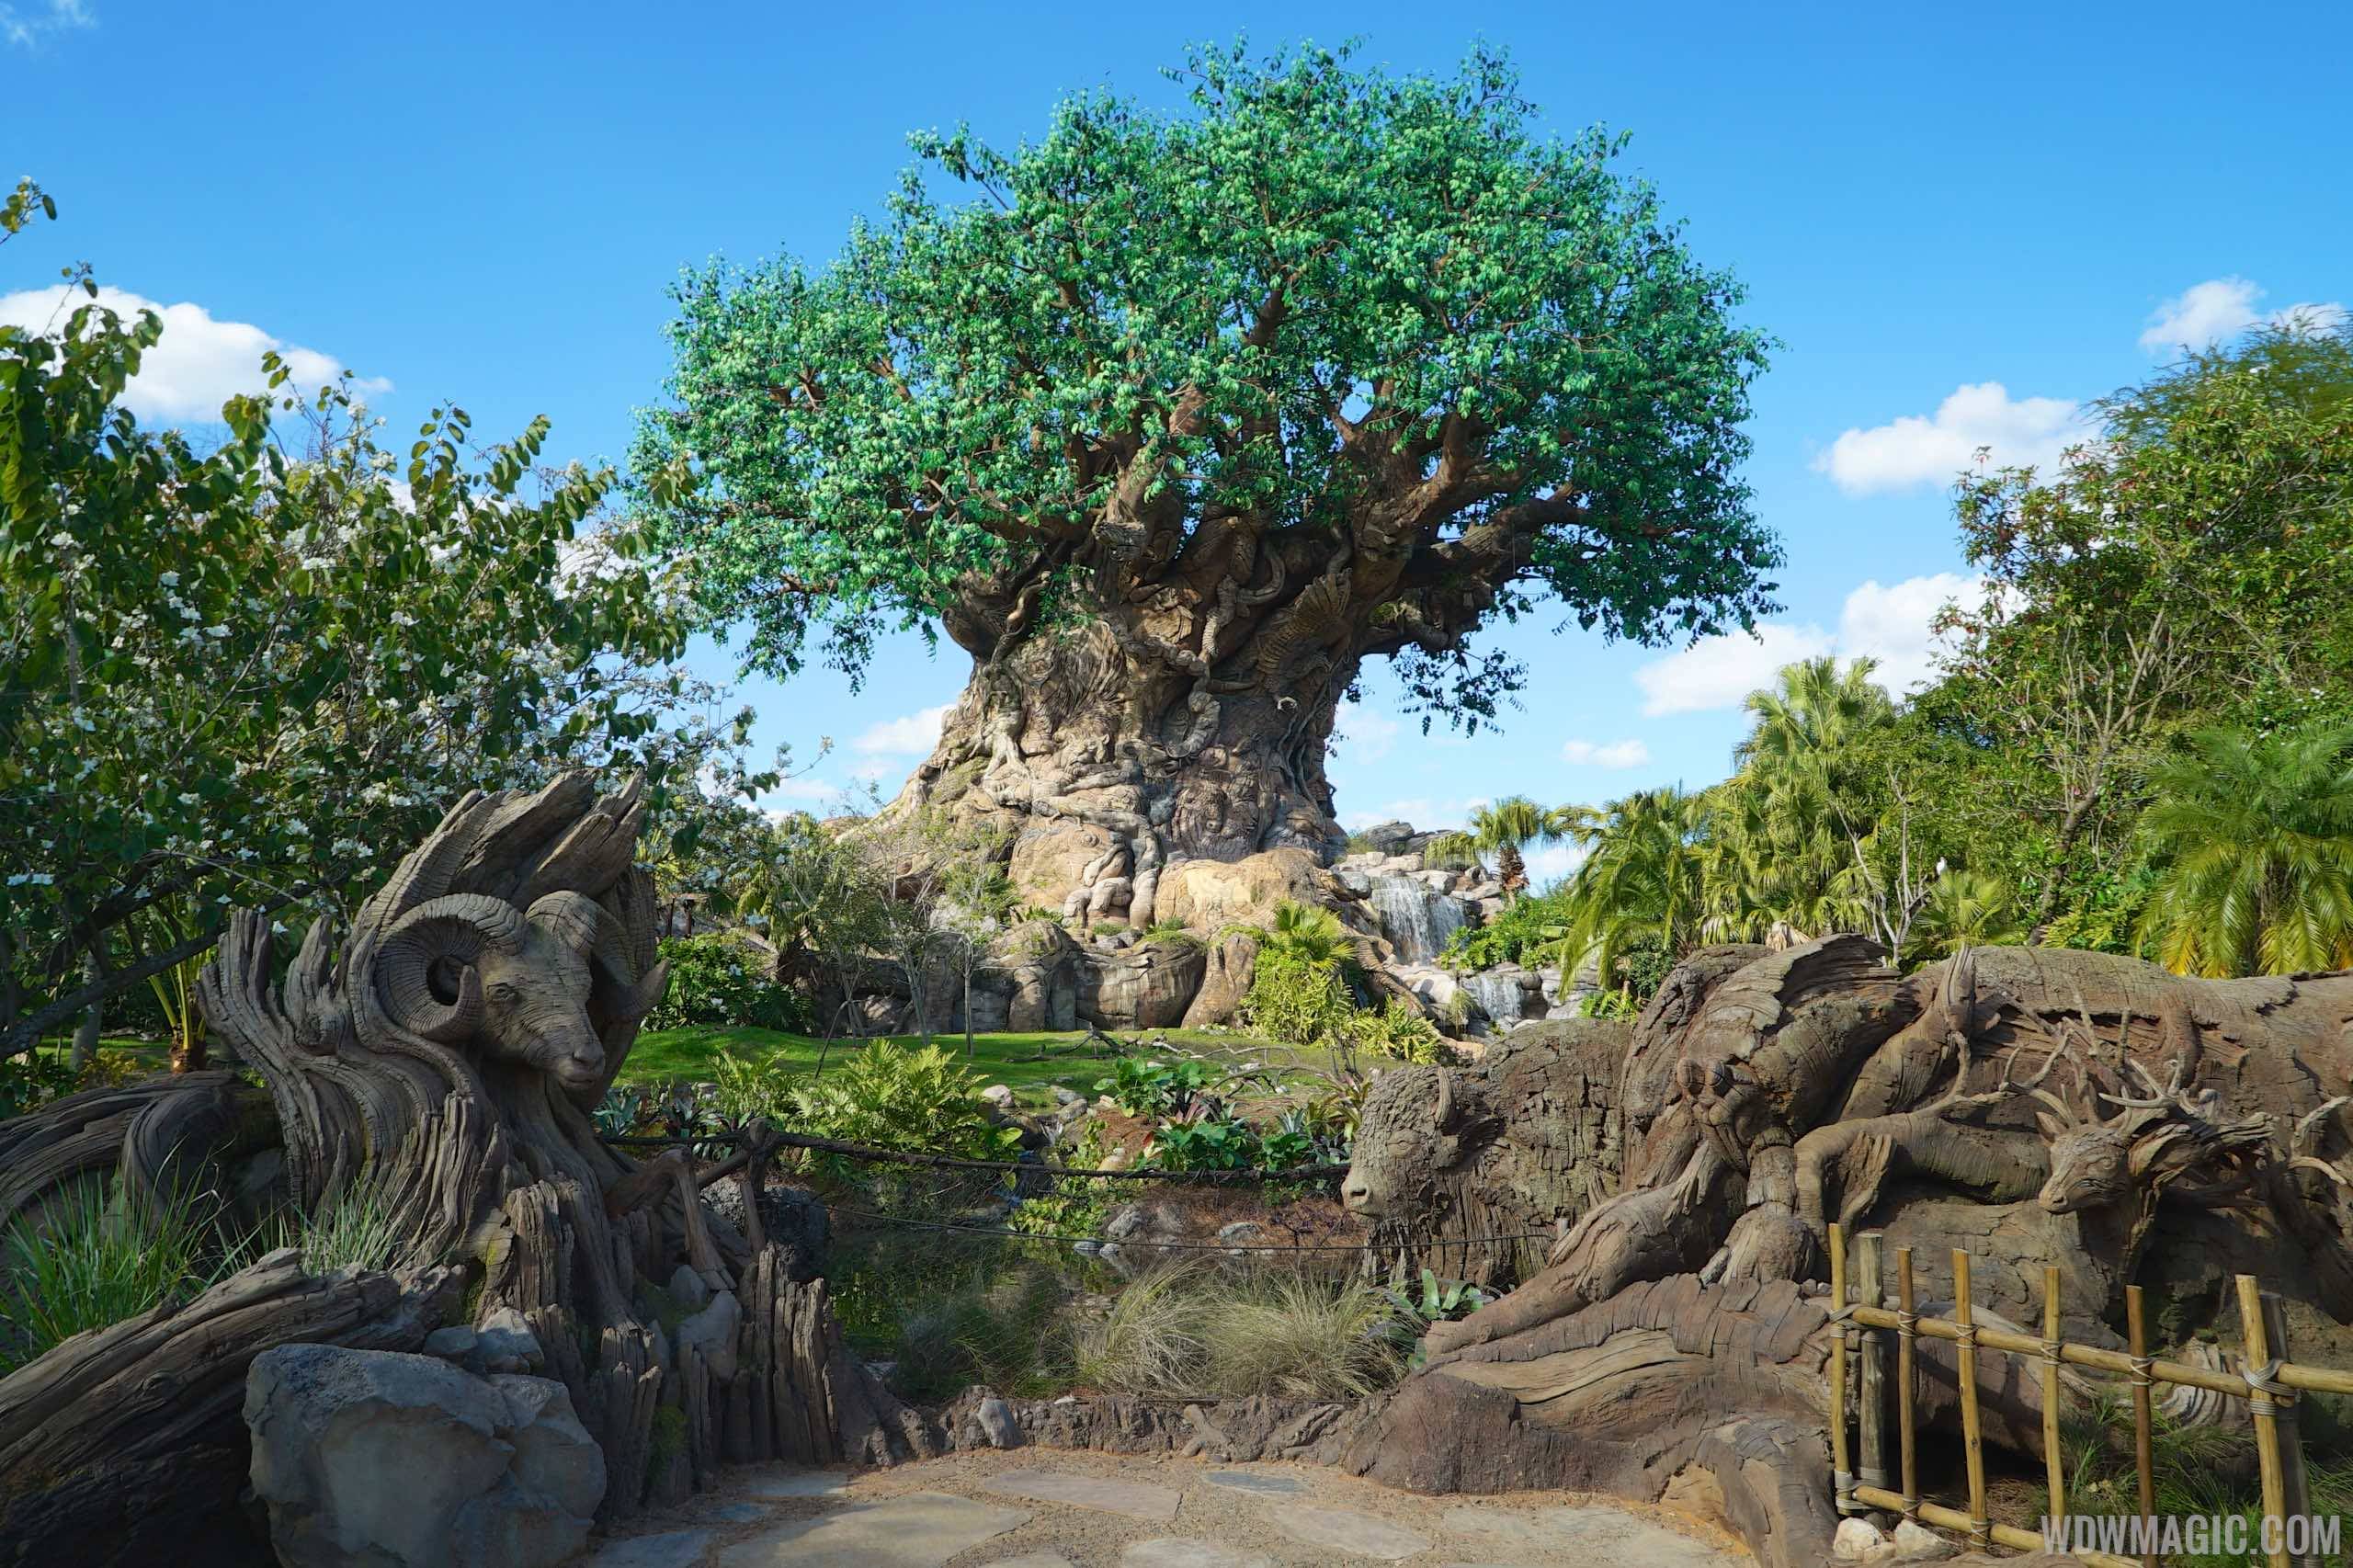 Disney's Animal Kingdom will join the Magic Kingdom with a July 11 opening once approved